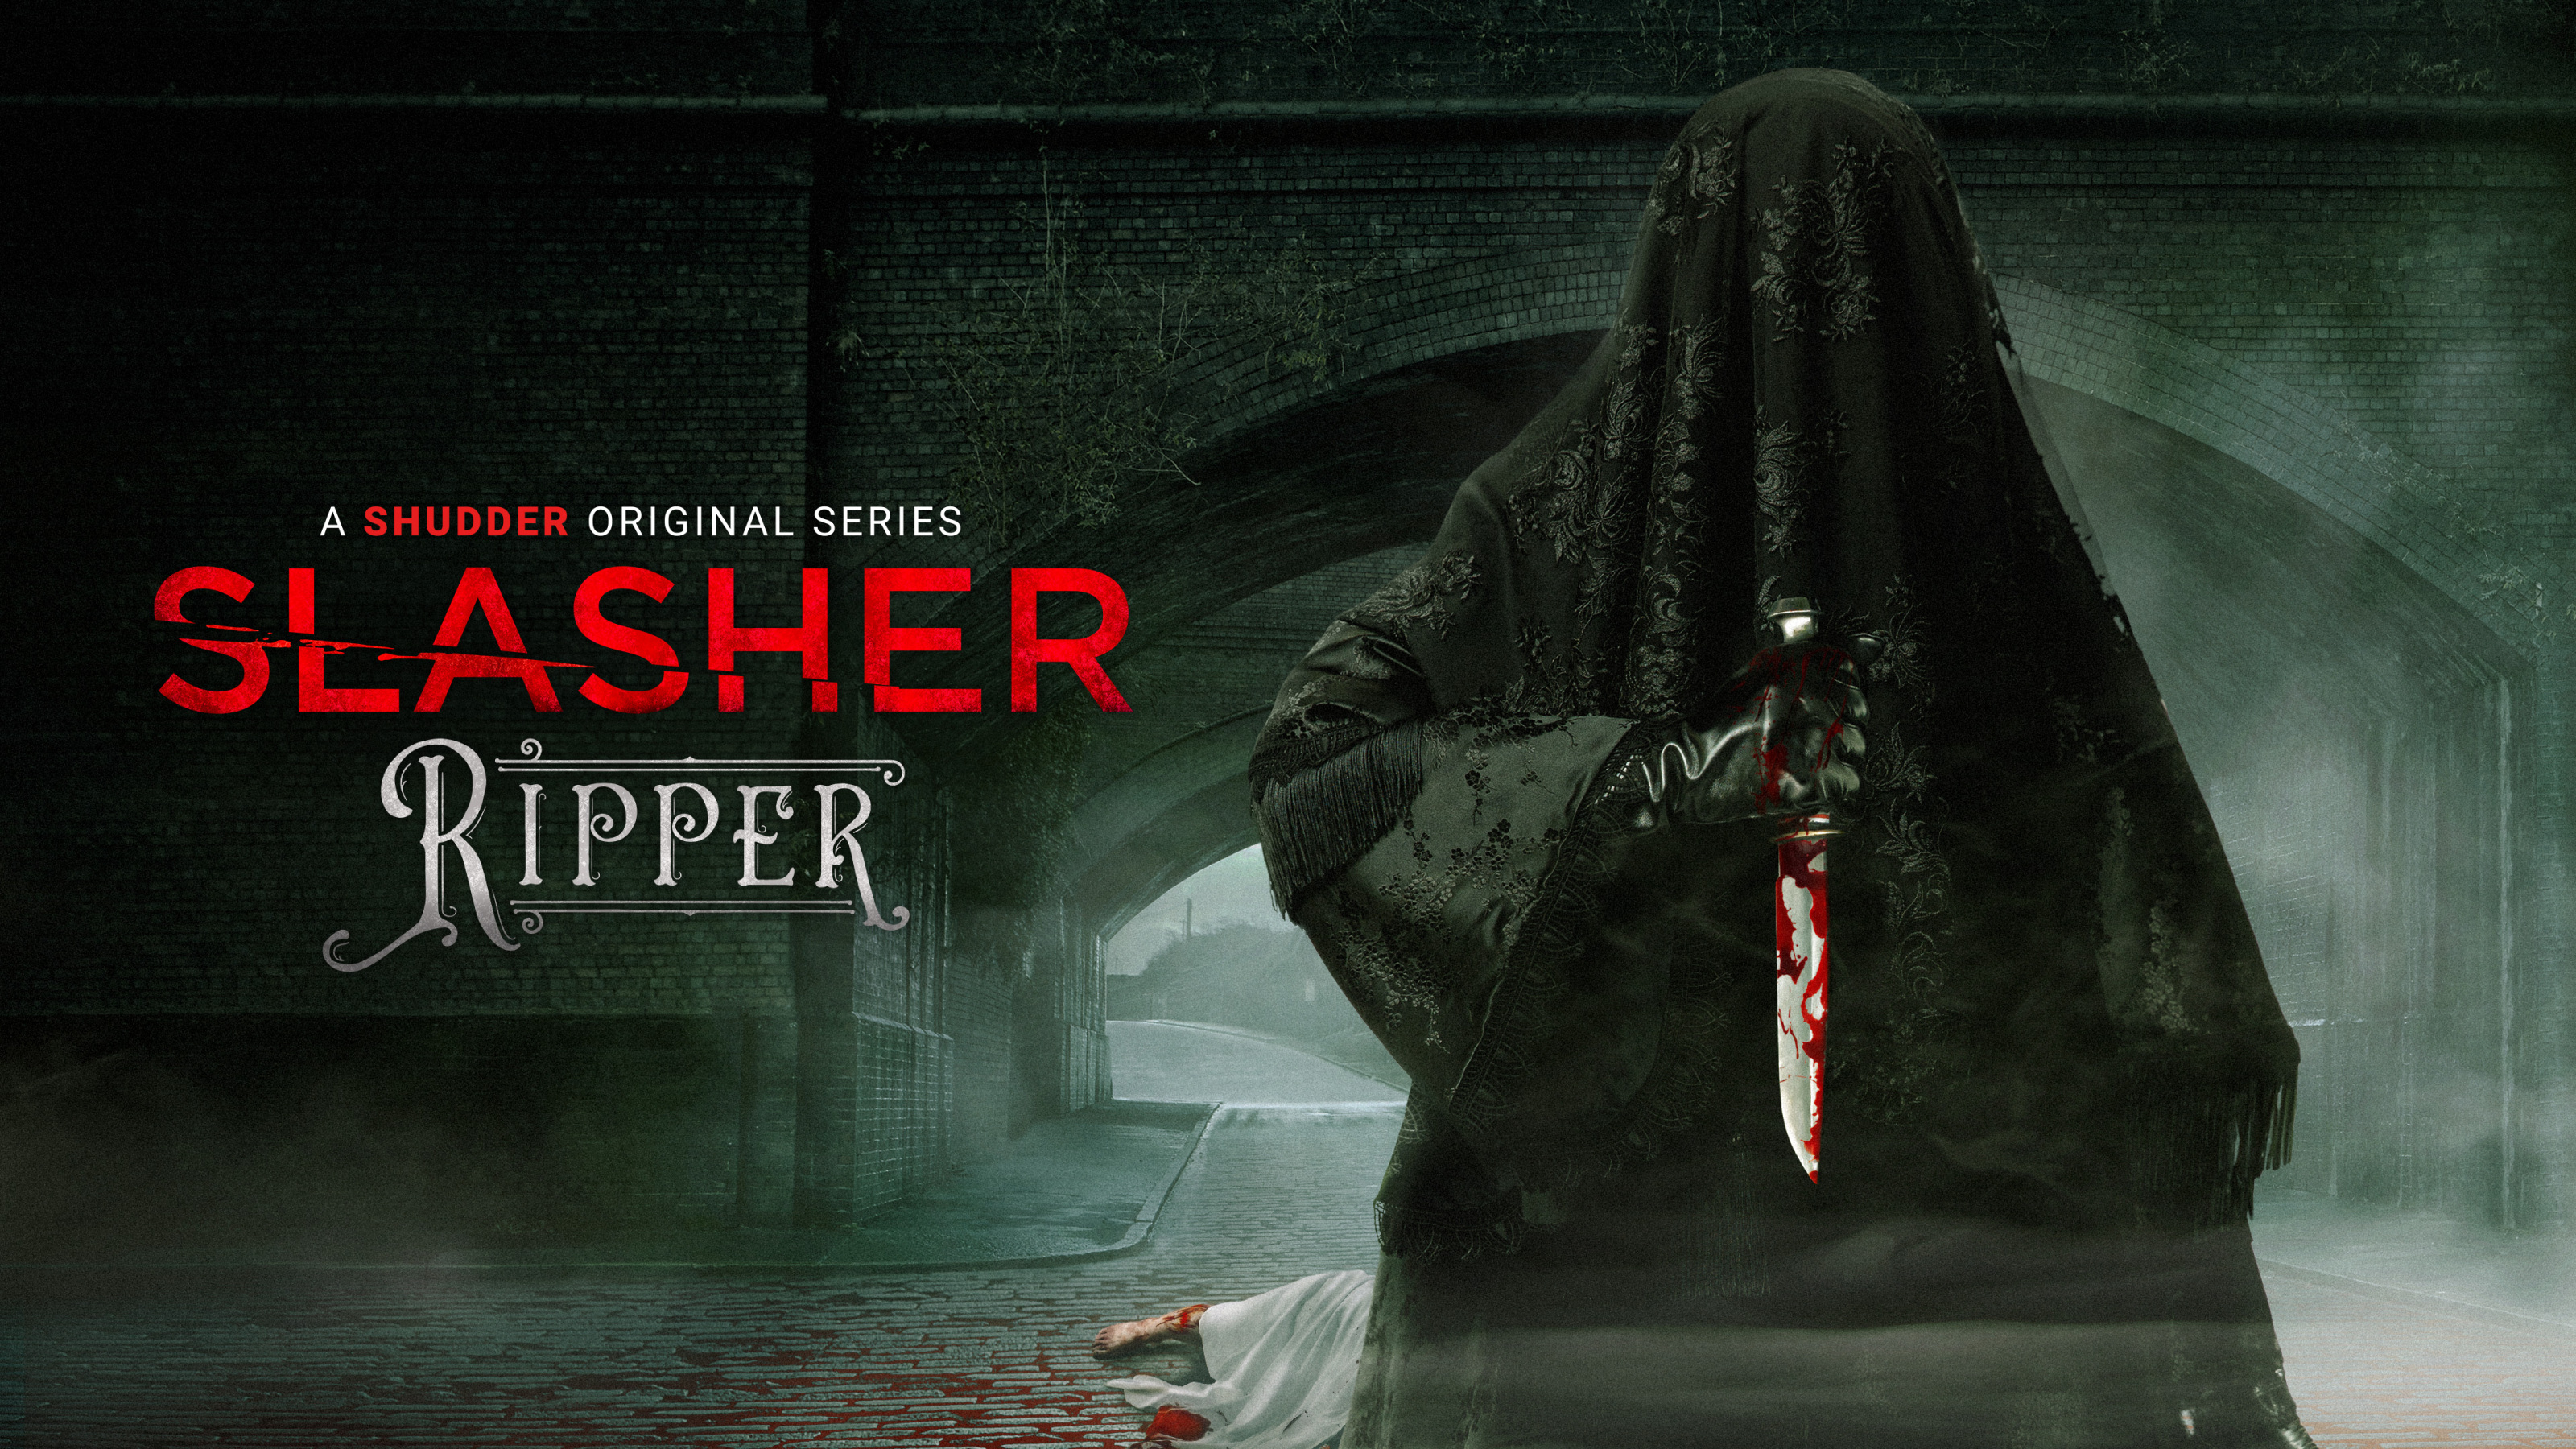 Dissecting The Five Twisted Seasons of Slasher